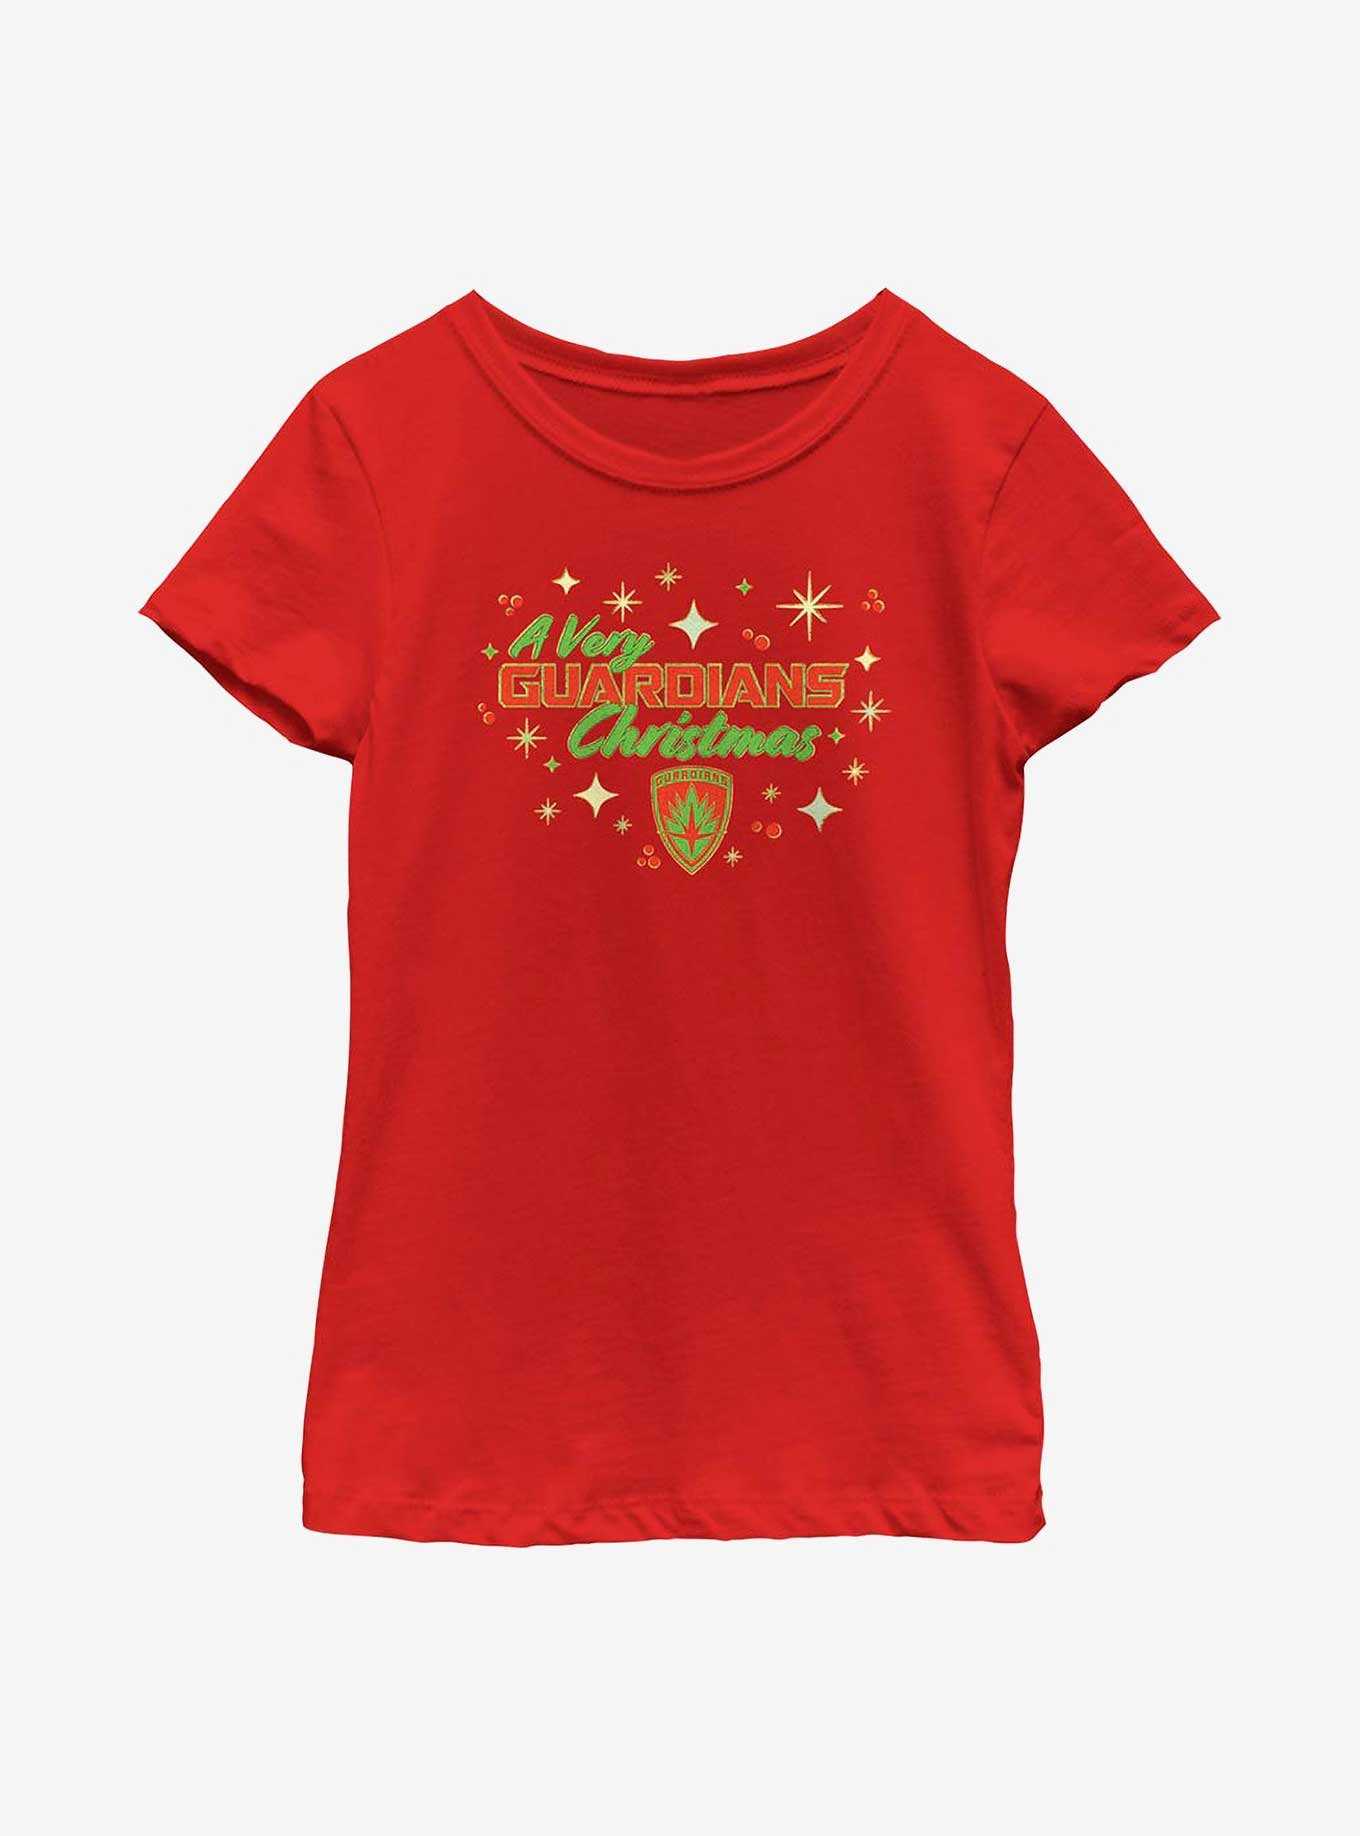 Marvel Guardians of the Galaxy Holiday Special A Very Guardians Christmas Youth Girls T-Shirt, , hi-res